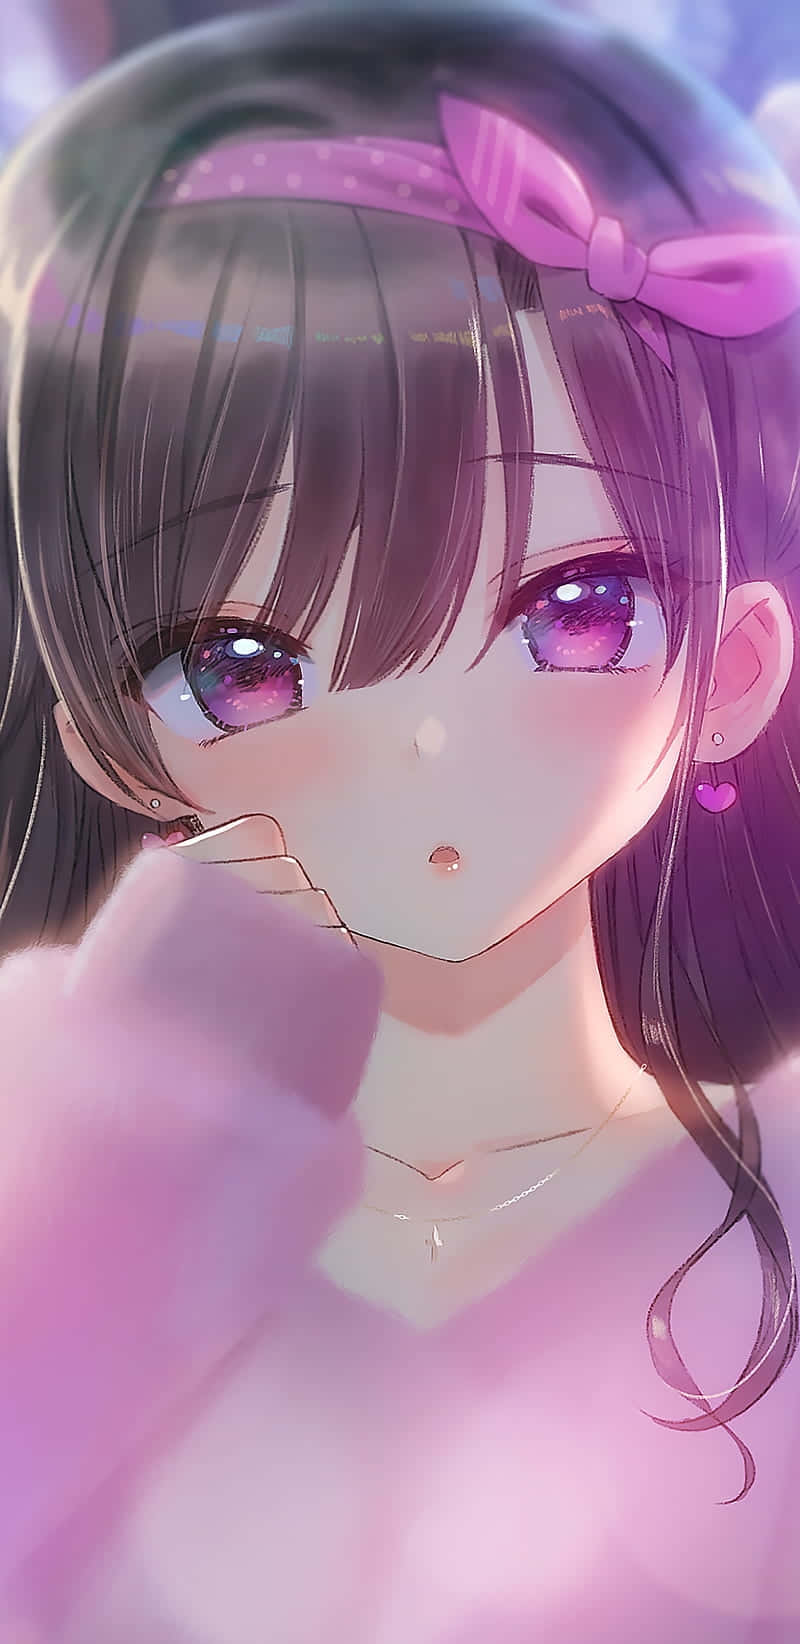 Sparkling Eyes Anime Girl Pink Accents Wallpaper